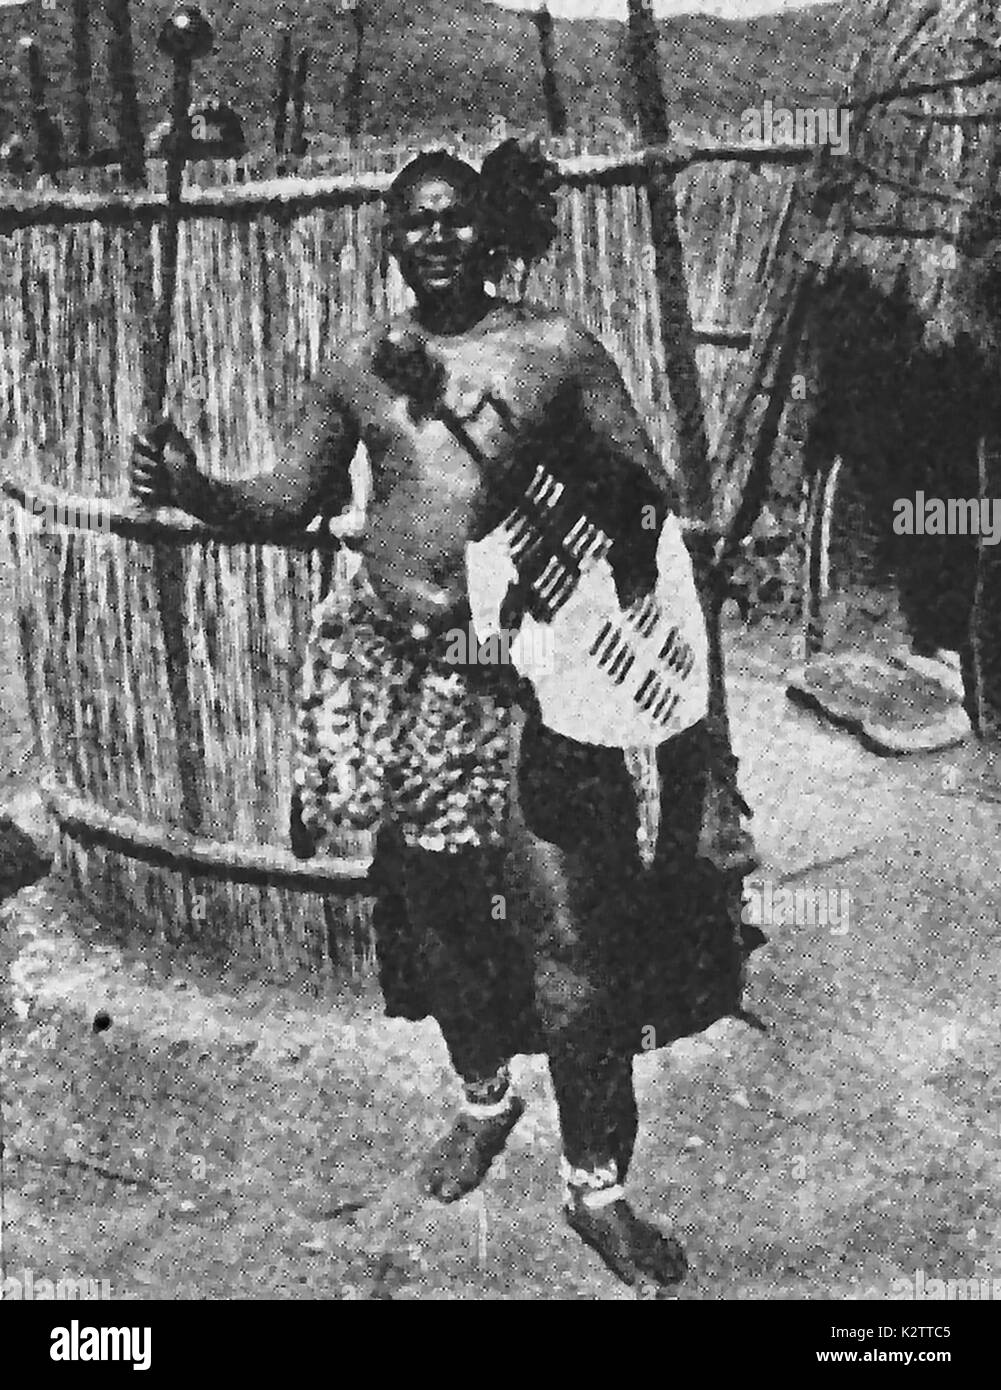 A 1940's  magazine photograph showing a native Zulu warrior dressed in a woven skirt and holding a hide covered shield and knob-kerri (club). He is standing outside of his corral containing his beehive hut dwelling. Stock Photo